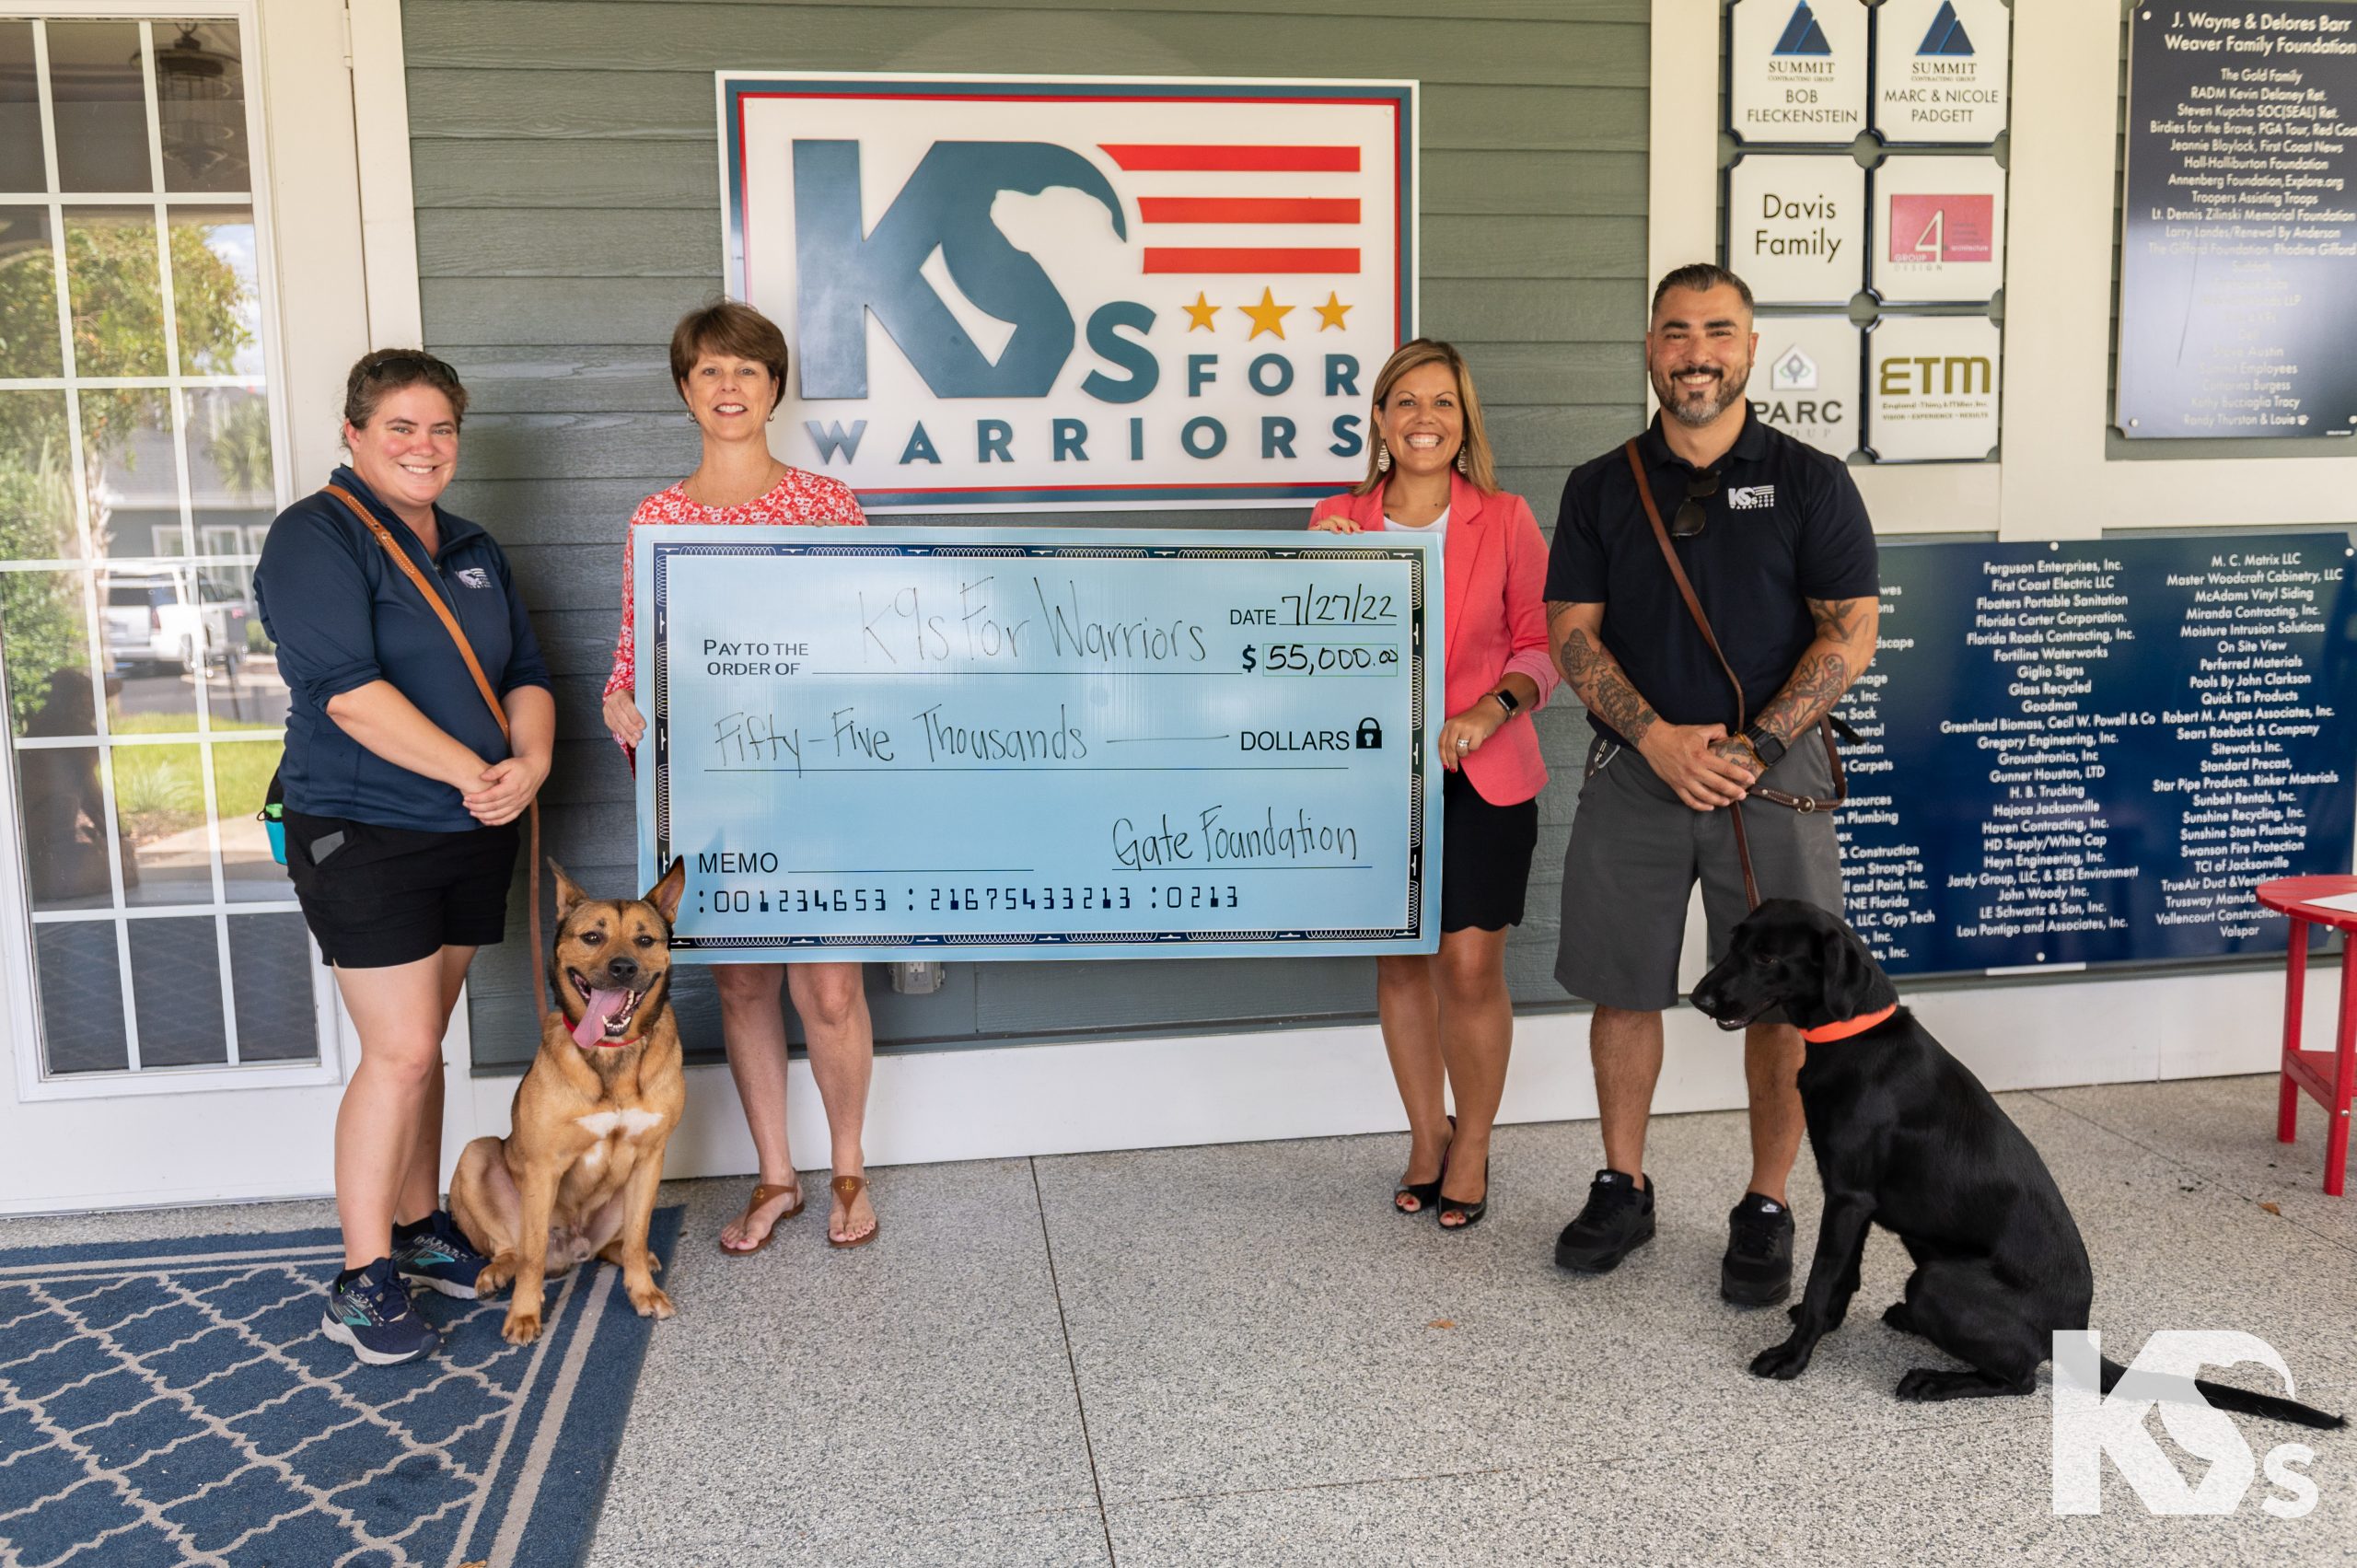 GATE coin box campaign raises $55,000 for K9s For Warriors